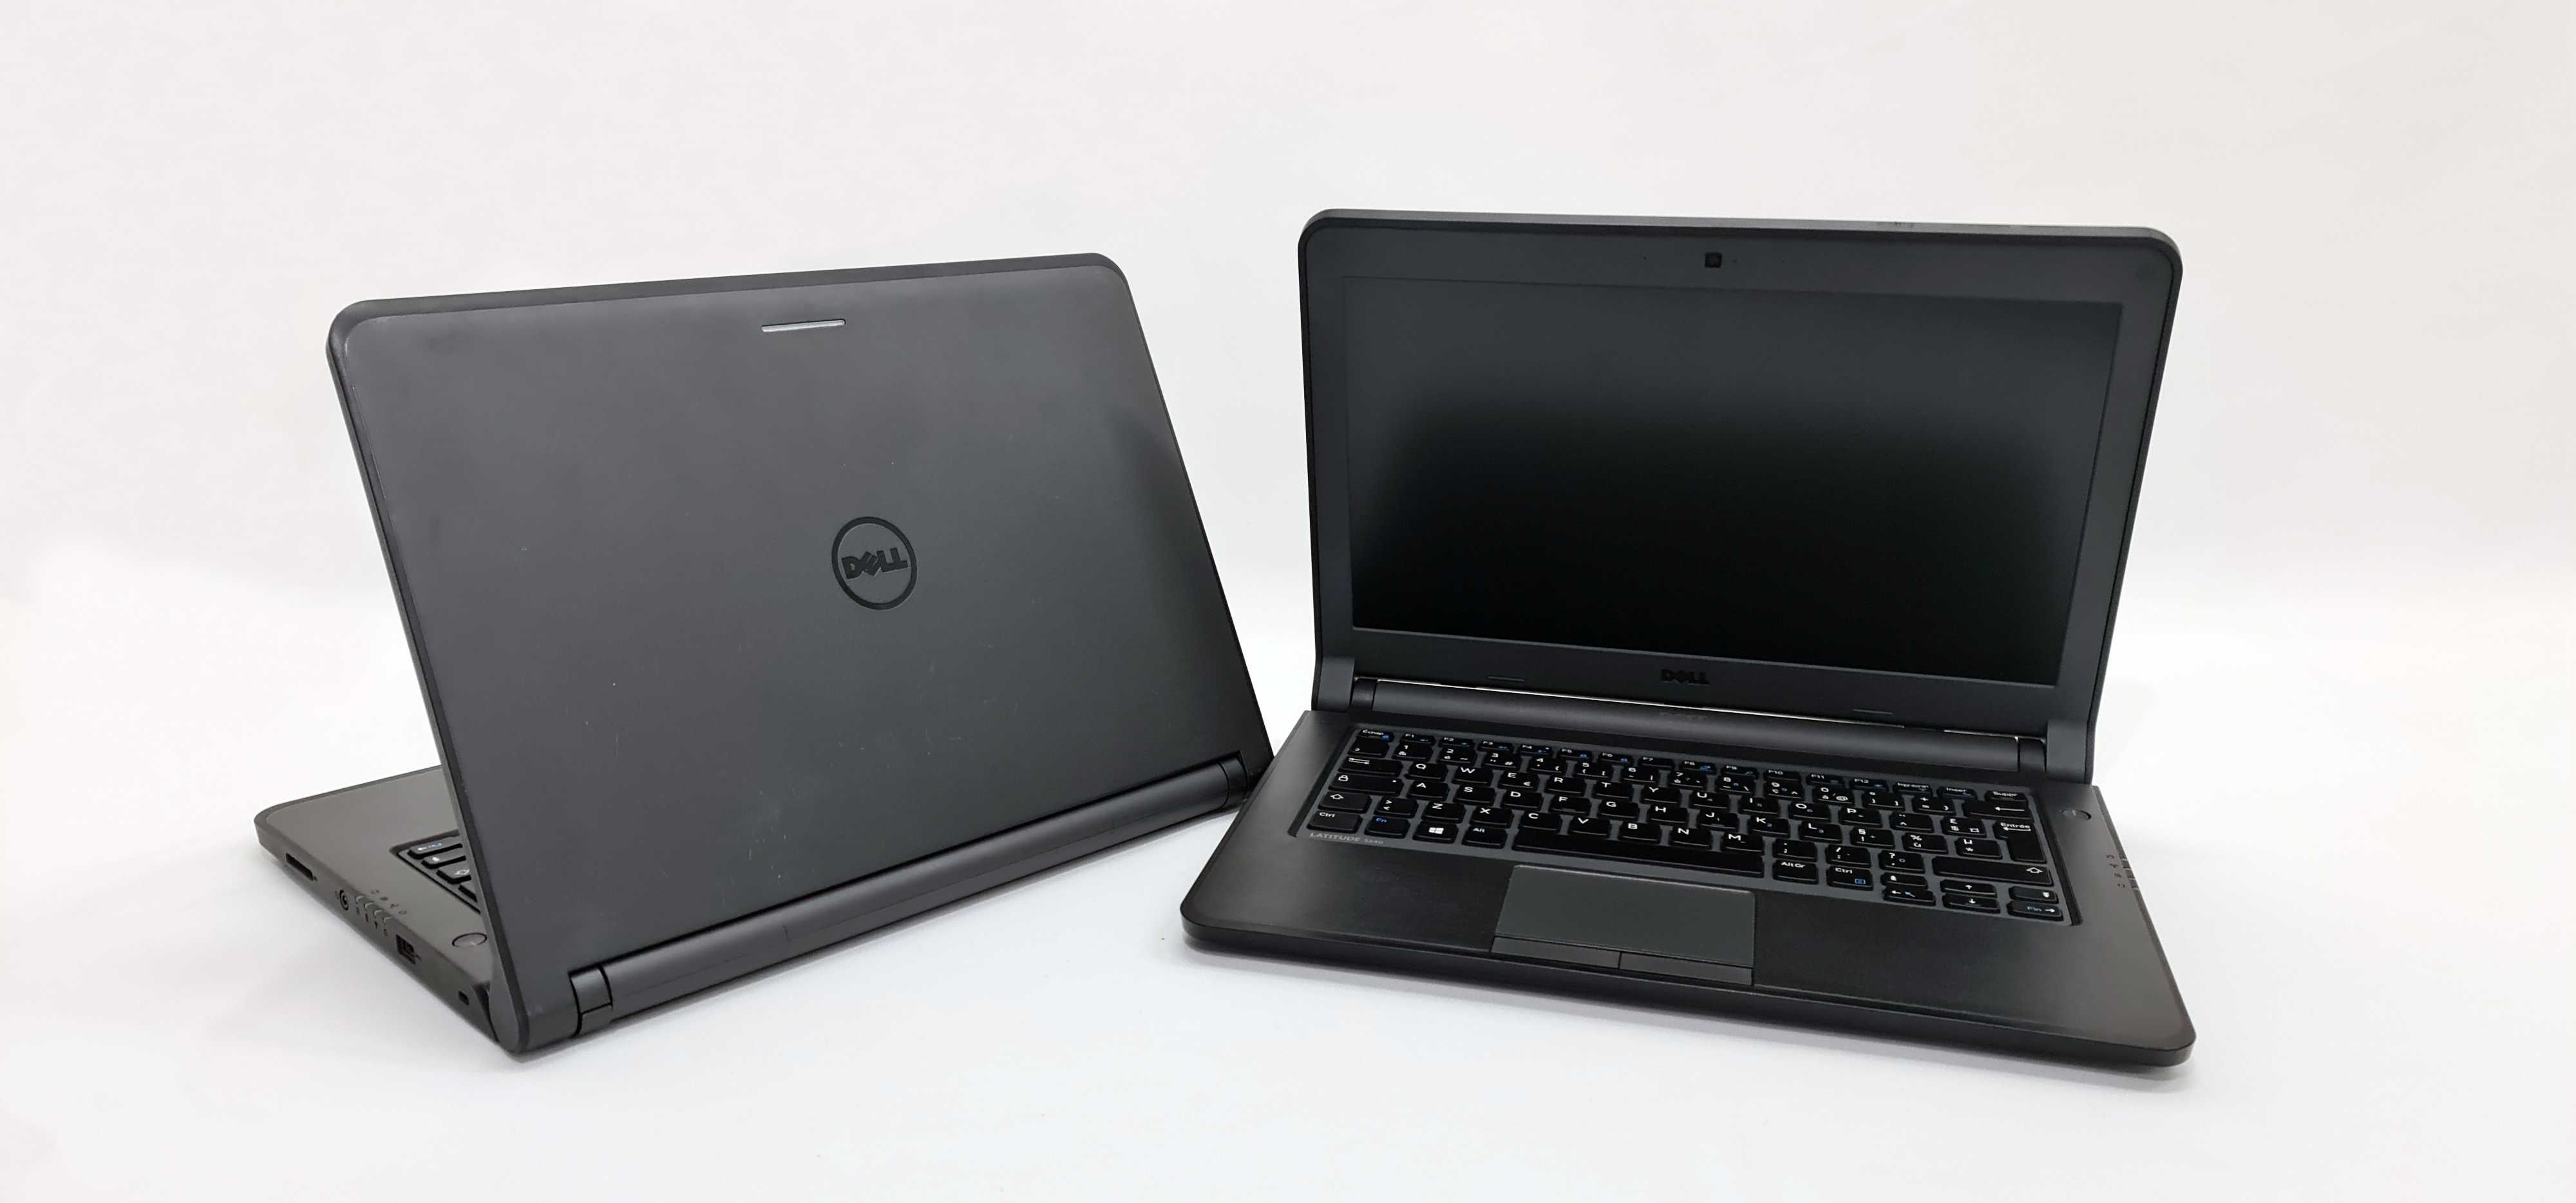 Dell serie bussines, Latitude, touch-screen, i5 ssd full hd ips